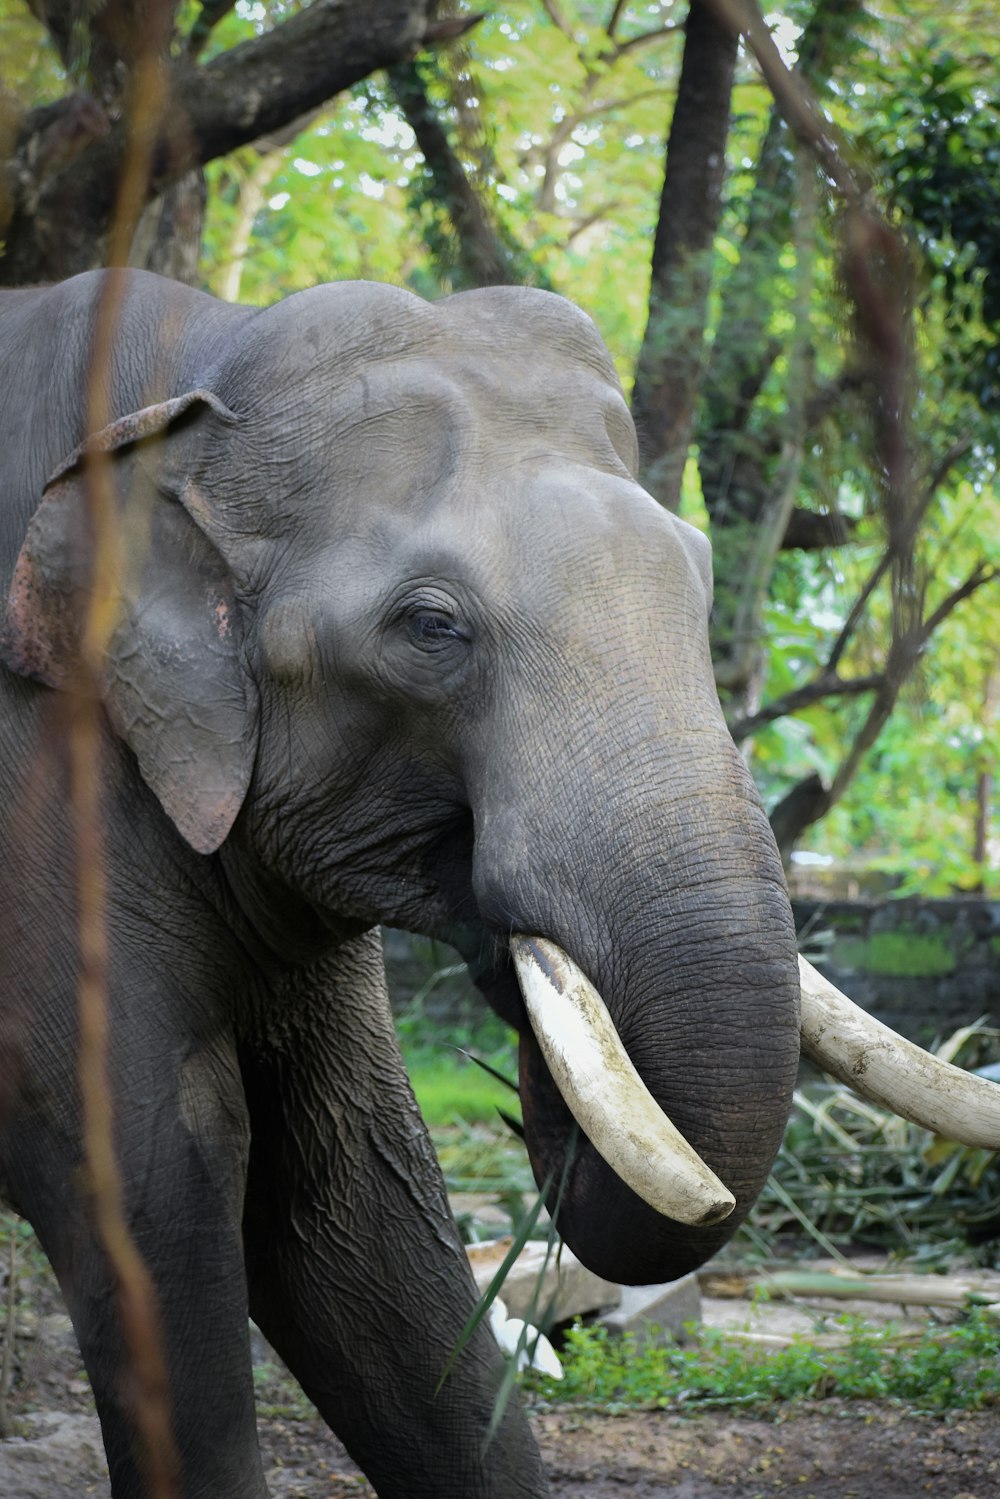 an elephant with long tusks walking through a forest